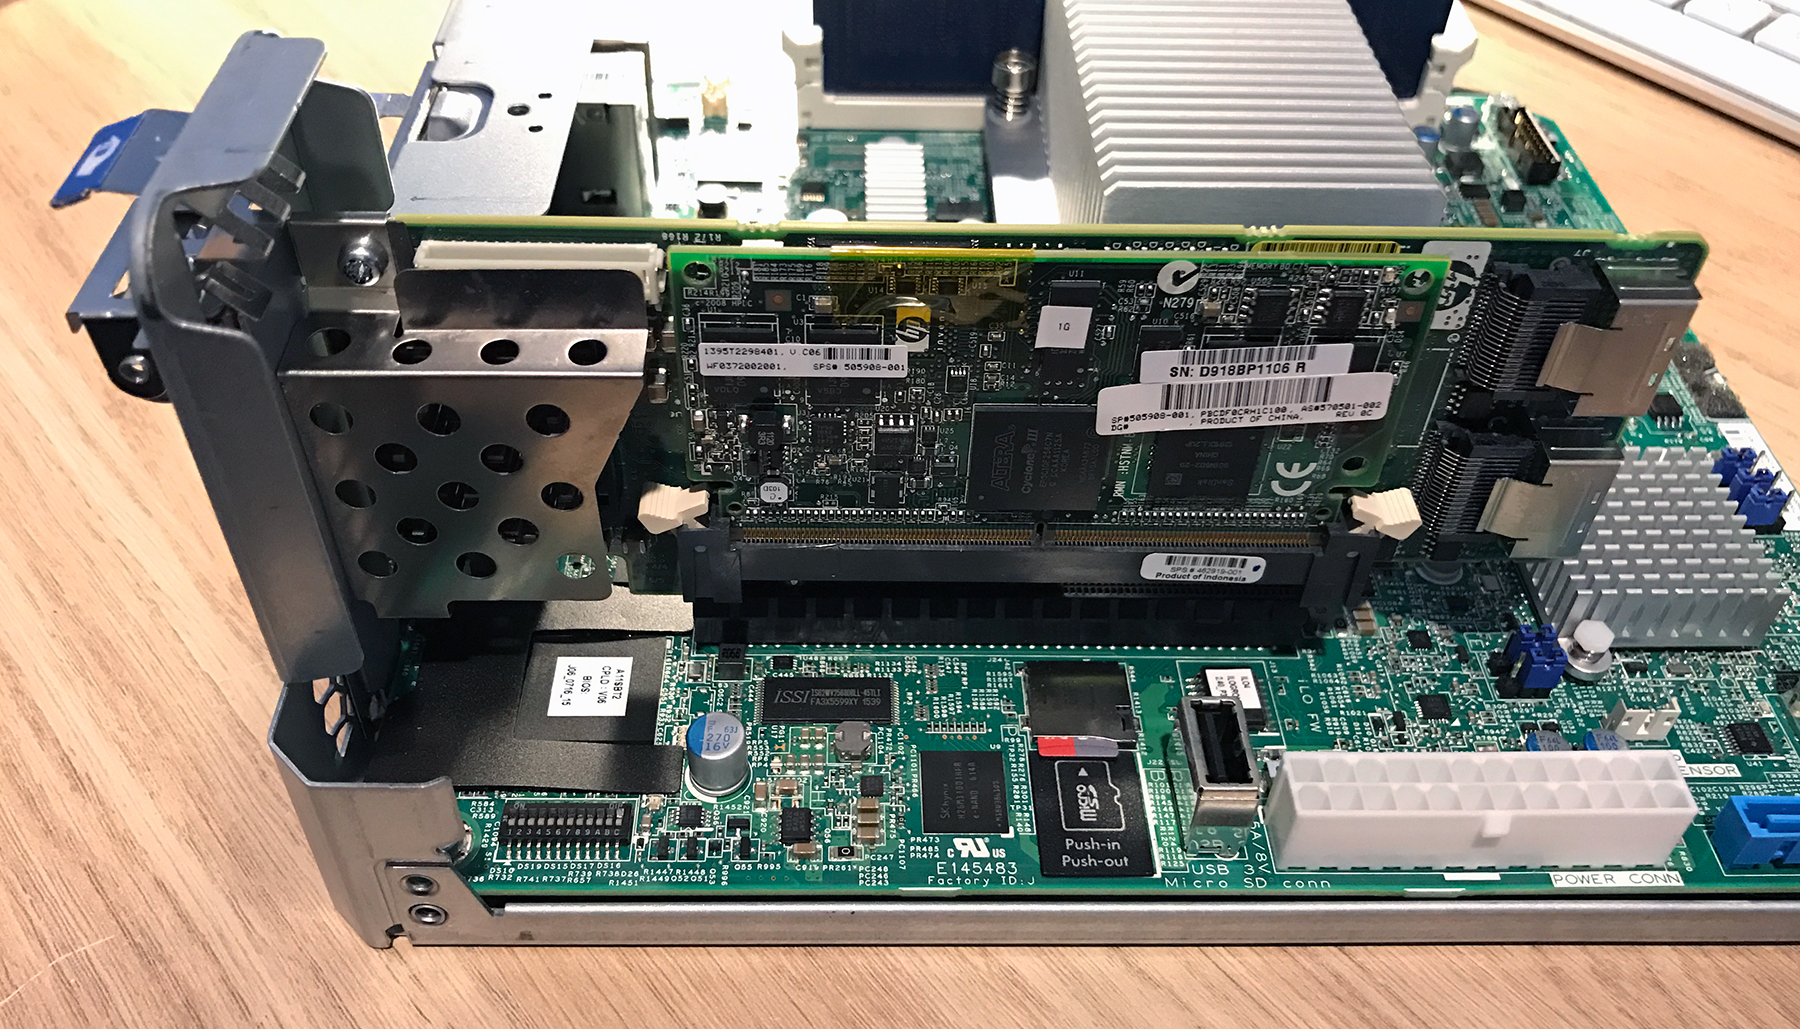 The HP P410 RAID Controller card installation in the Microserver Gen8